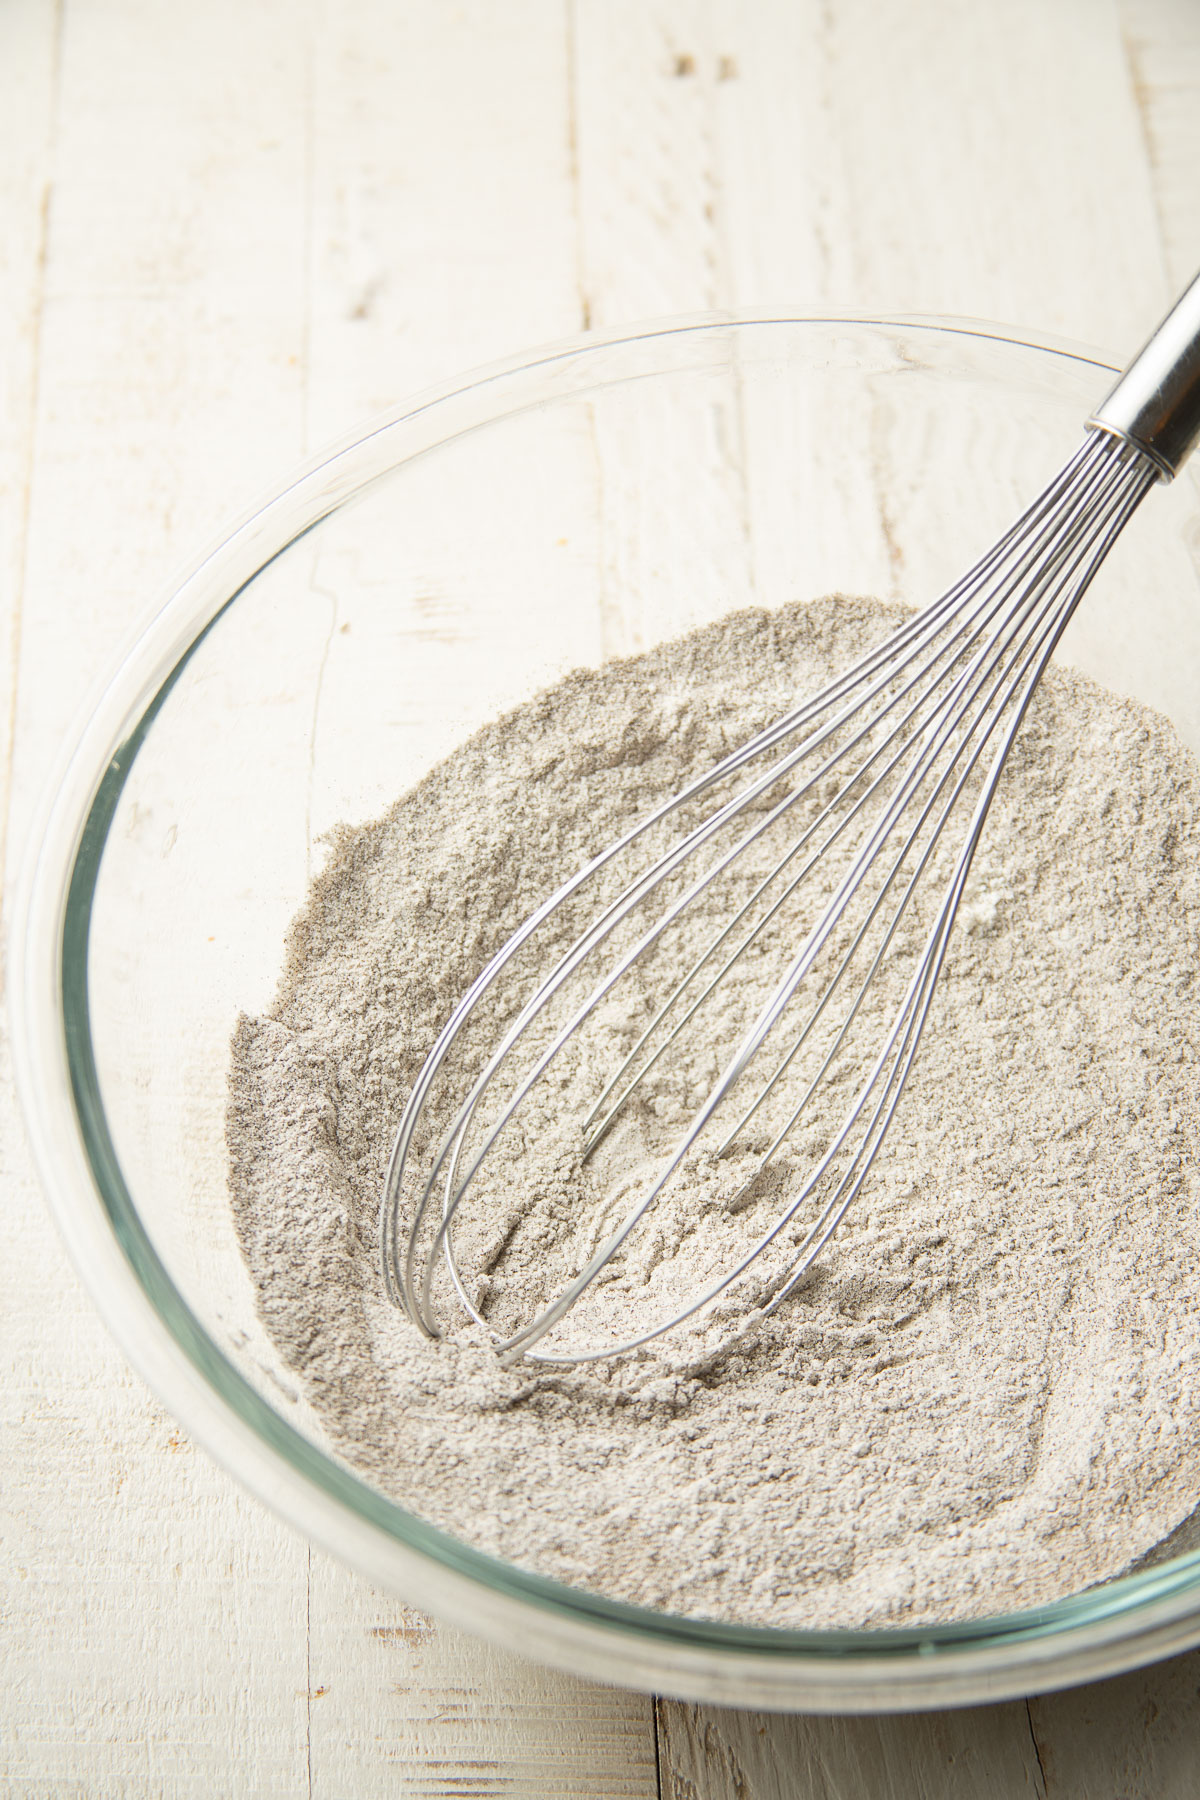 Dry ingredients for buckwheat pancake batter in a mixing bowl with whisk.